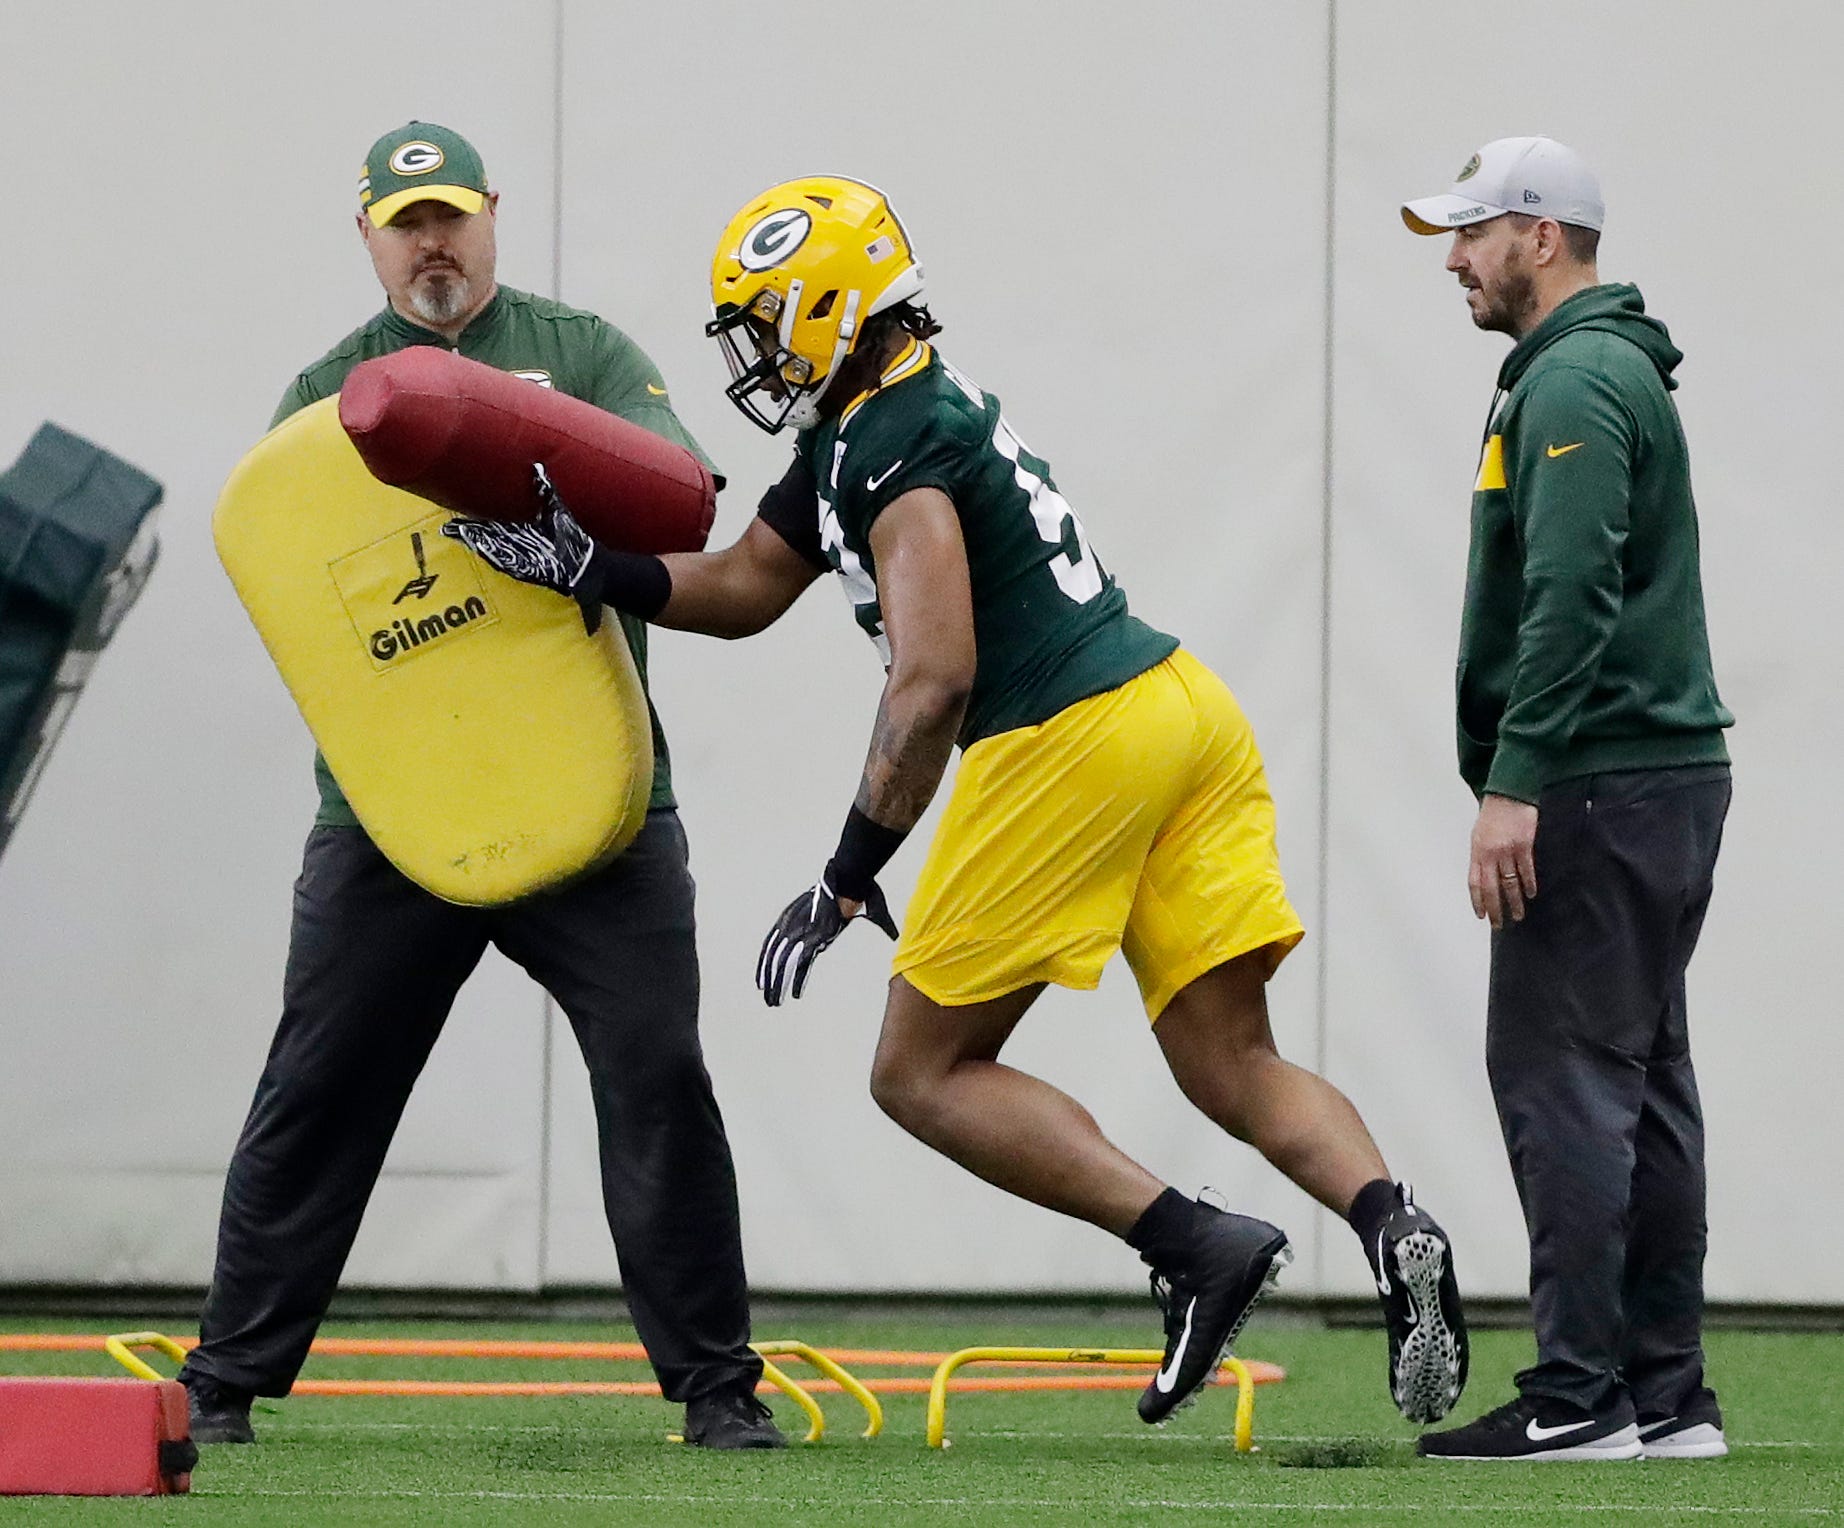 Green Bay Packers linebacker Rashan Gary (52) during practice at rookie minicamp at the Don Hutson Center on Friday, May 3, 2019 in Ashwaubenon, Wis.
Adam Wesley/USA TODAY NETWORK-Wis